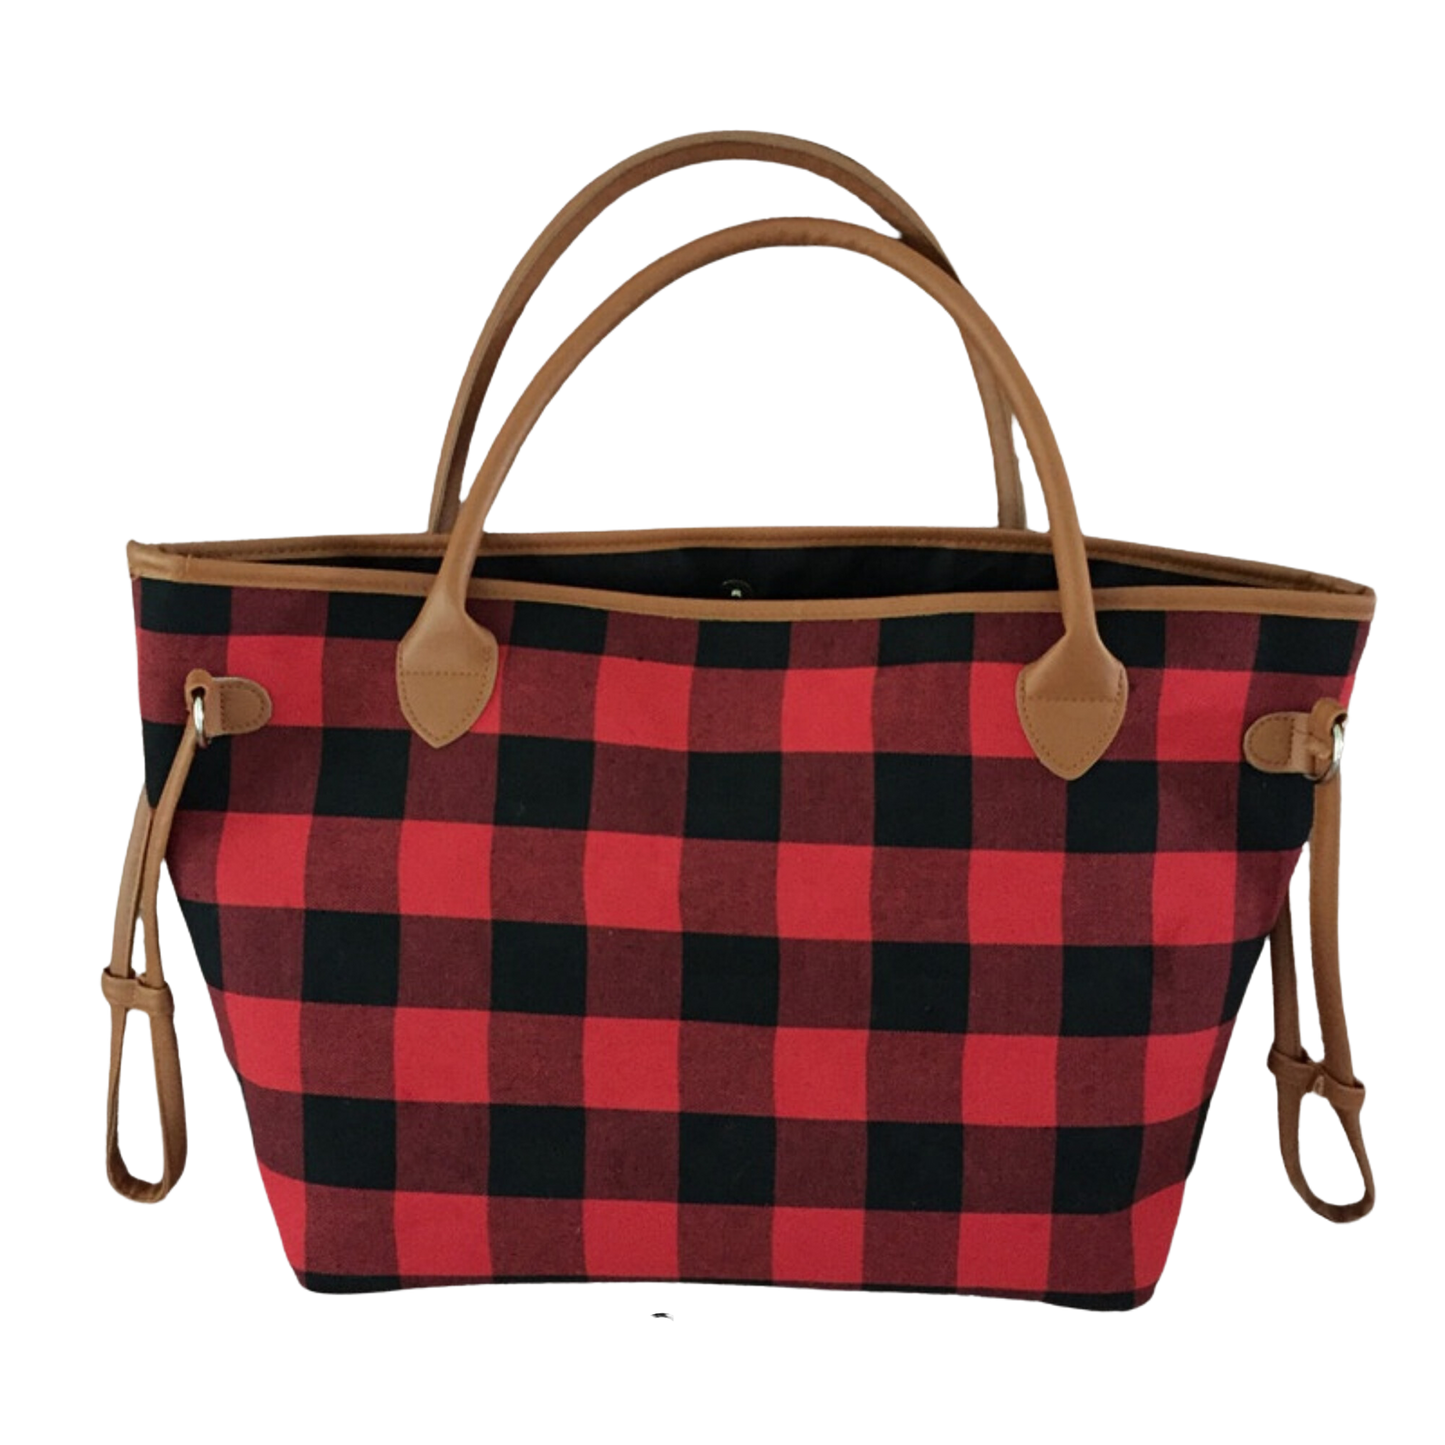 Meredith Tote Bag | Red Buffalo Plaid Tote Apparel & Accessories by The Rustic Redbud | The Rustic Redbud Boutique